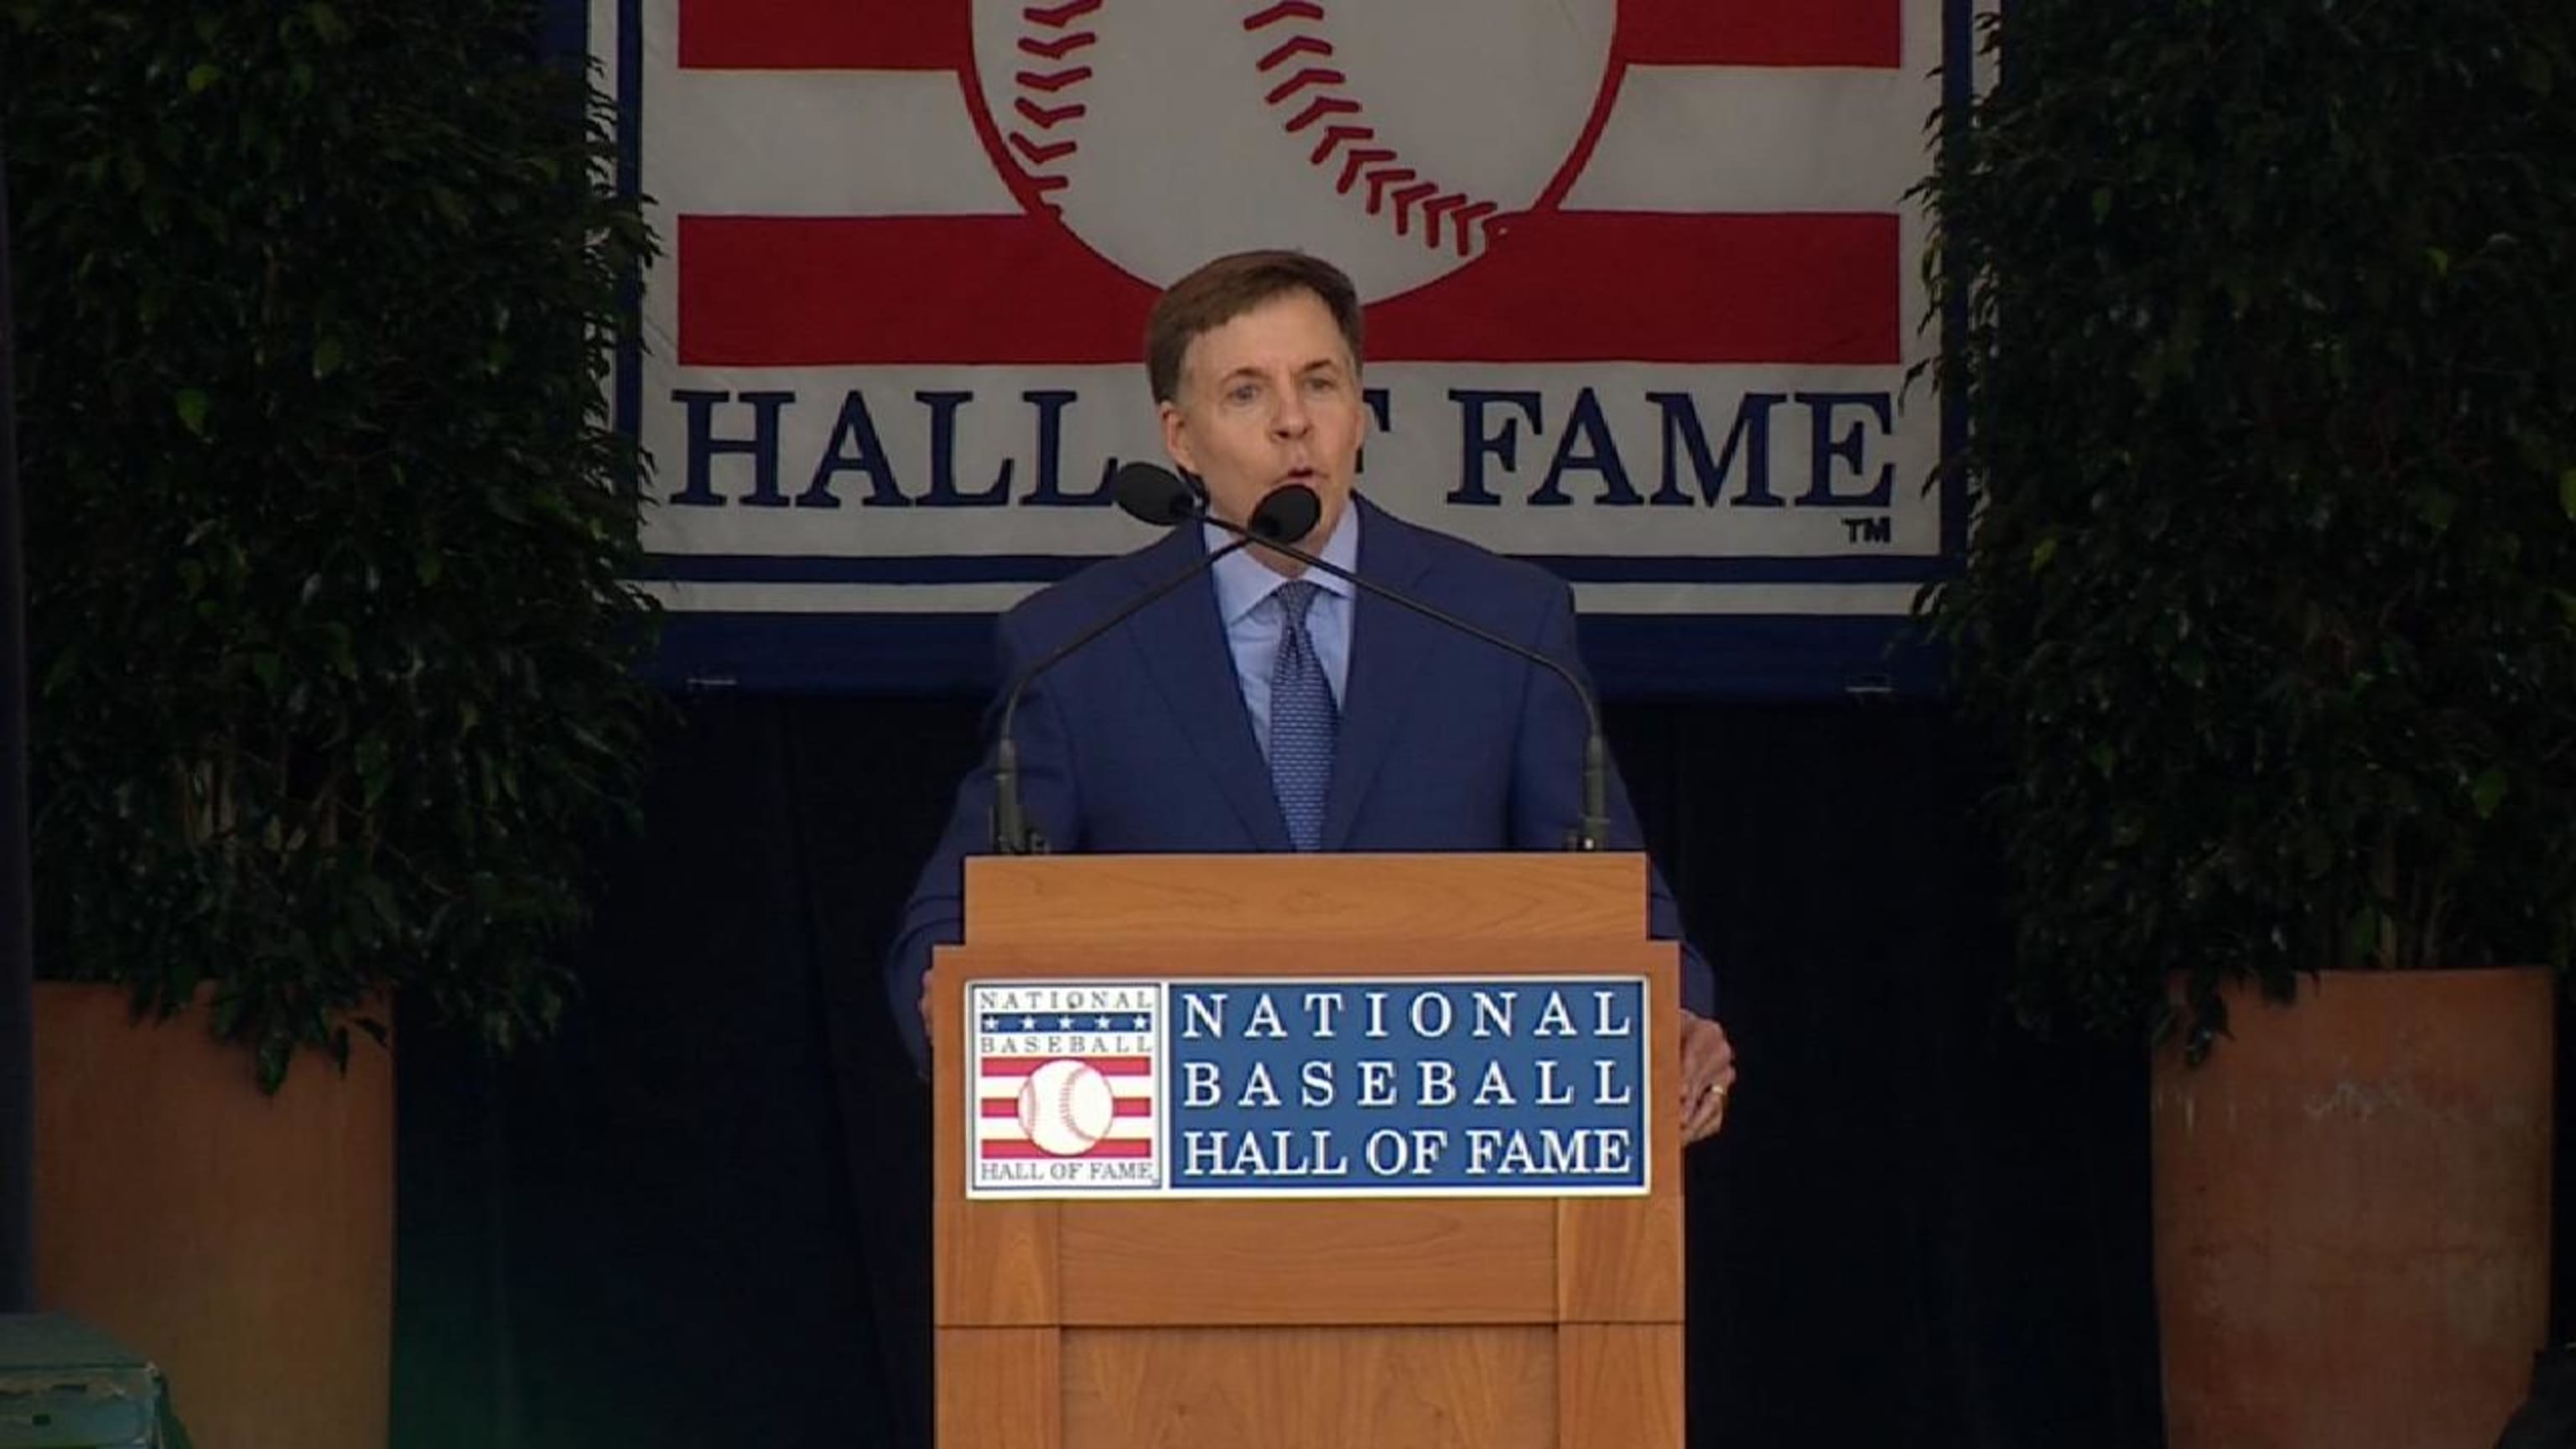 Bob Costas had some fun at Bob Uecker's expense in his Hall of Fame speech